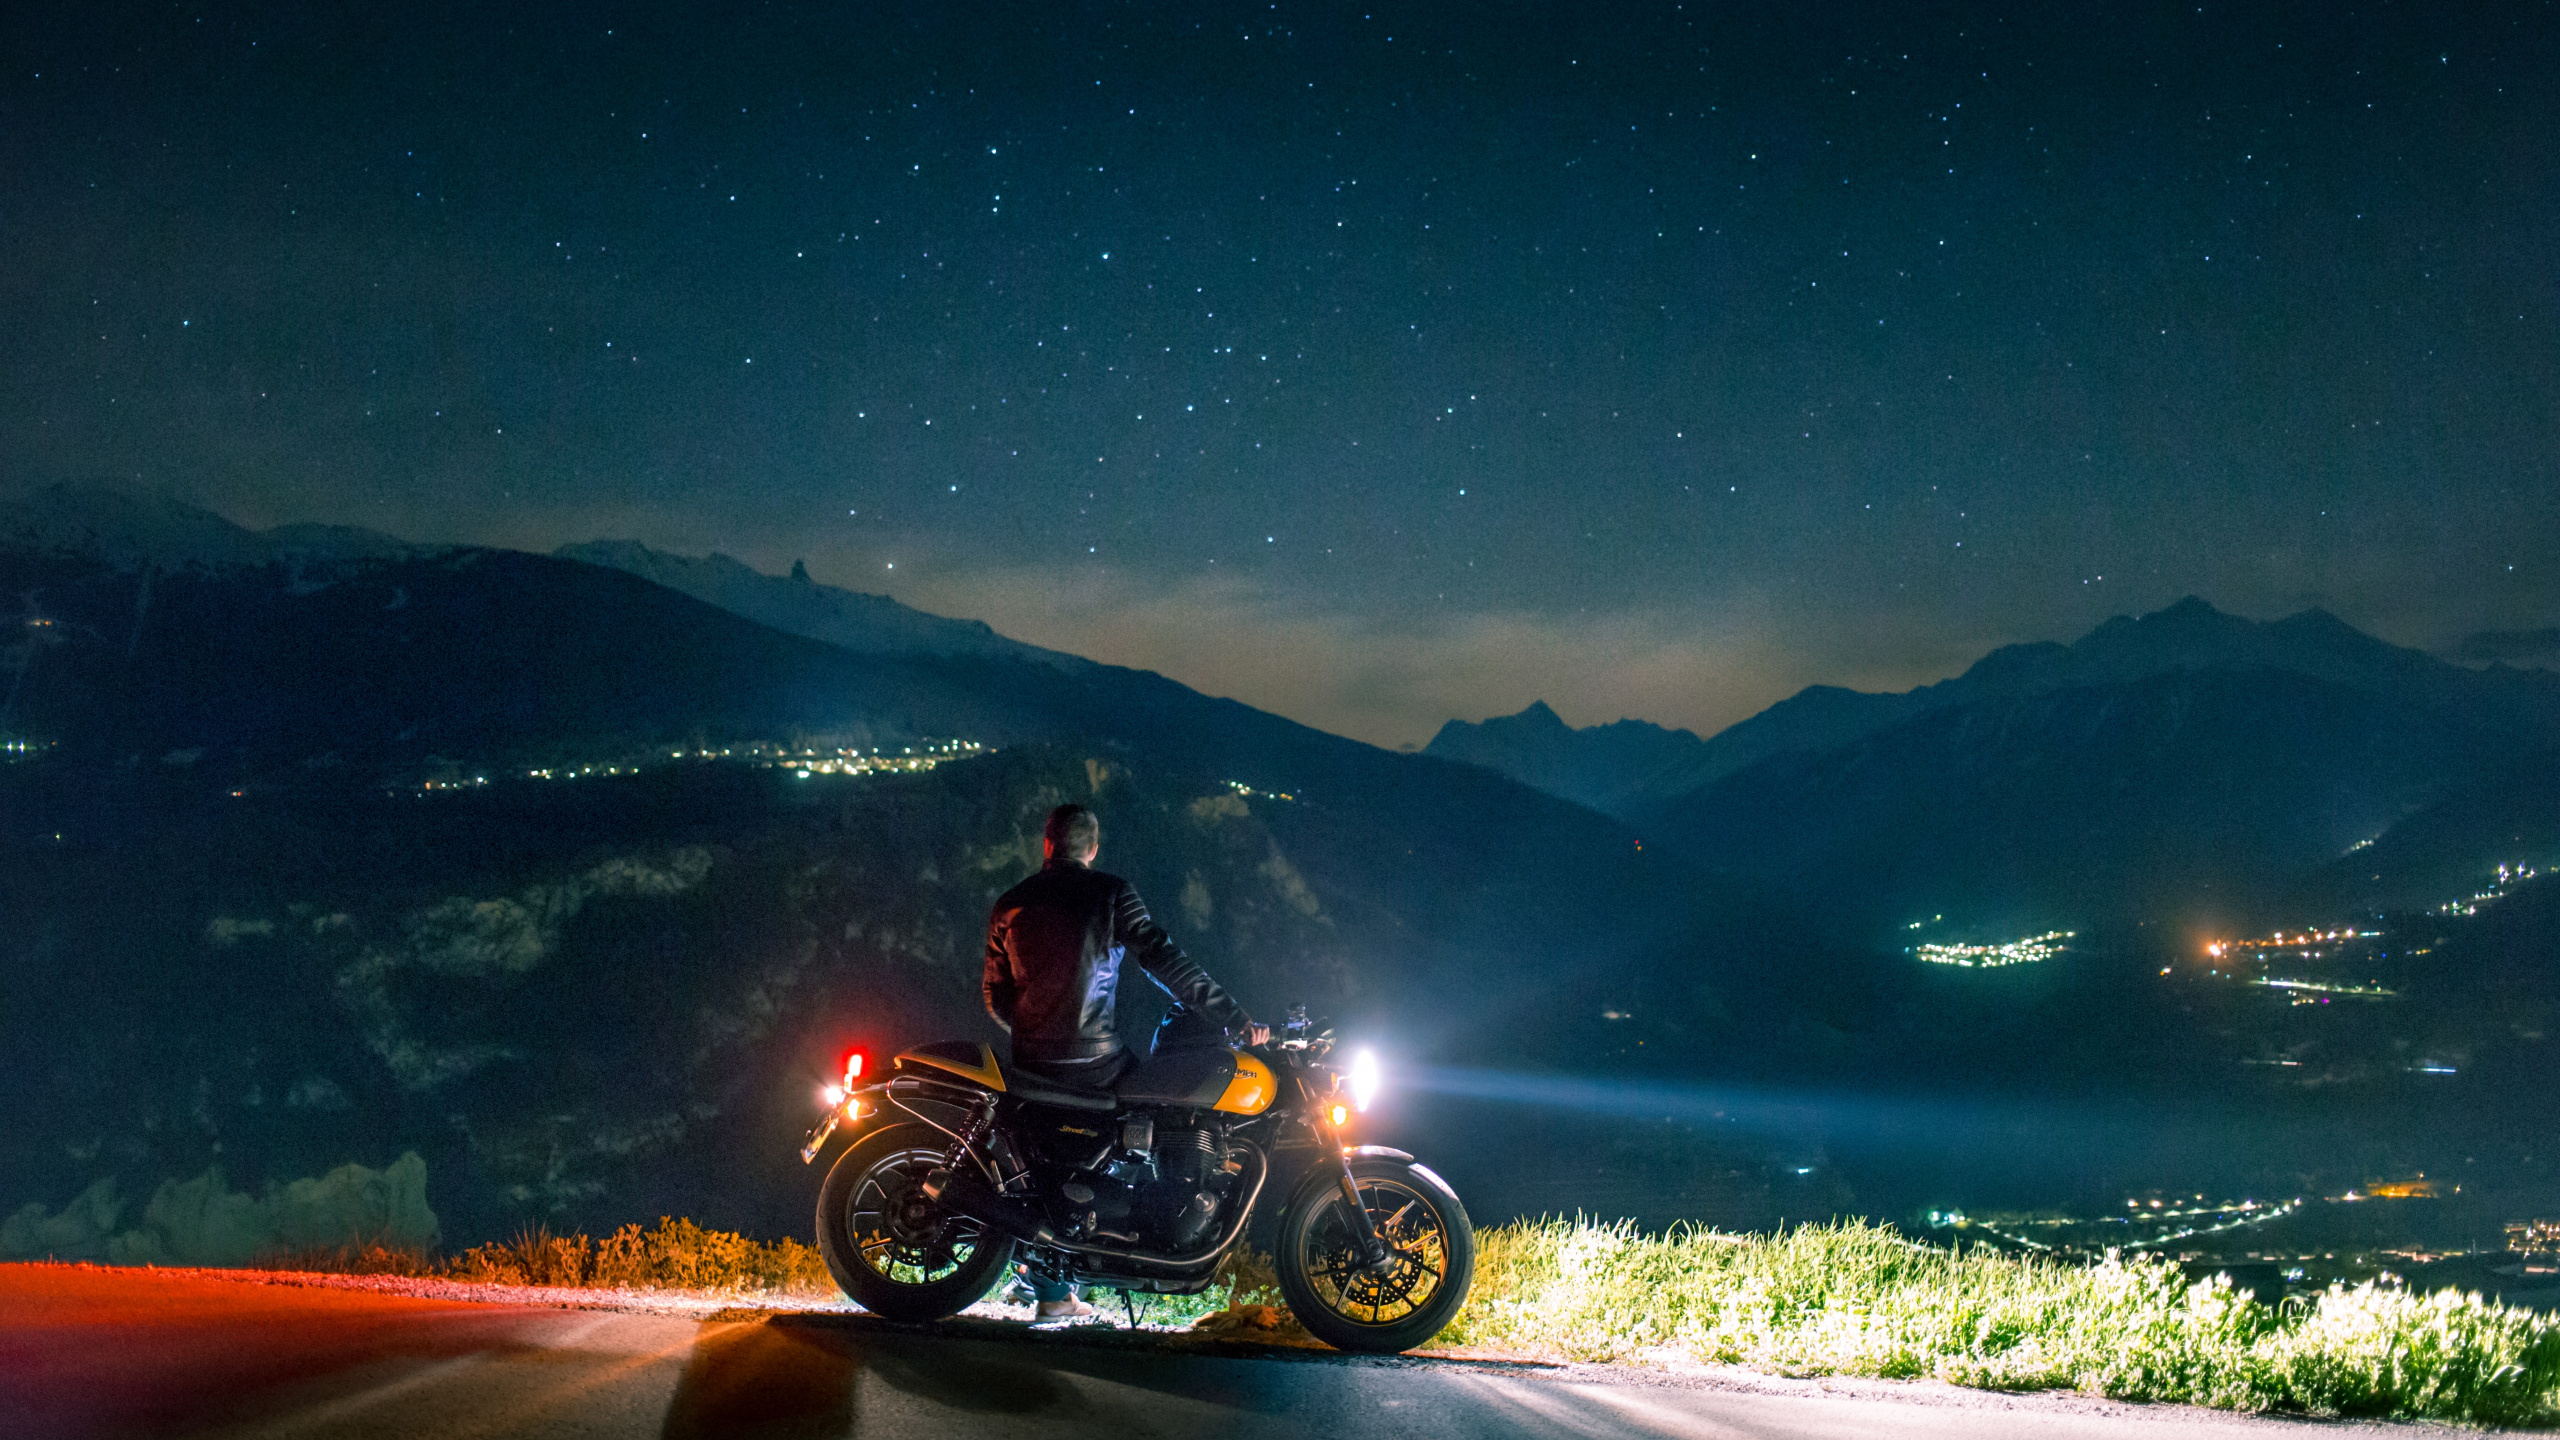 Man Riding Motorcycle on Road During Night Time. Wallpaper in 2560x1440 Resolution